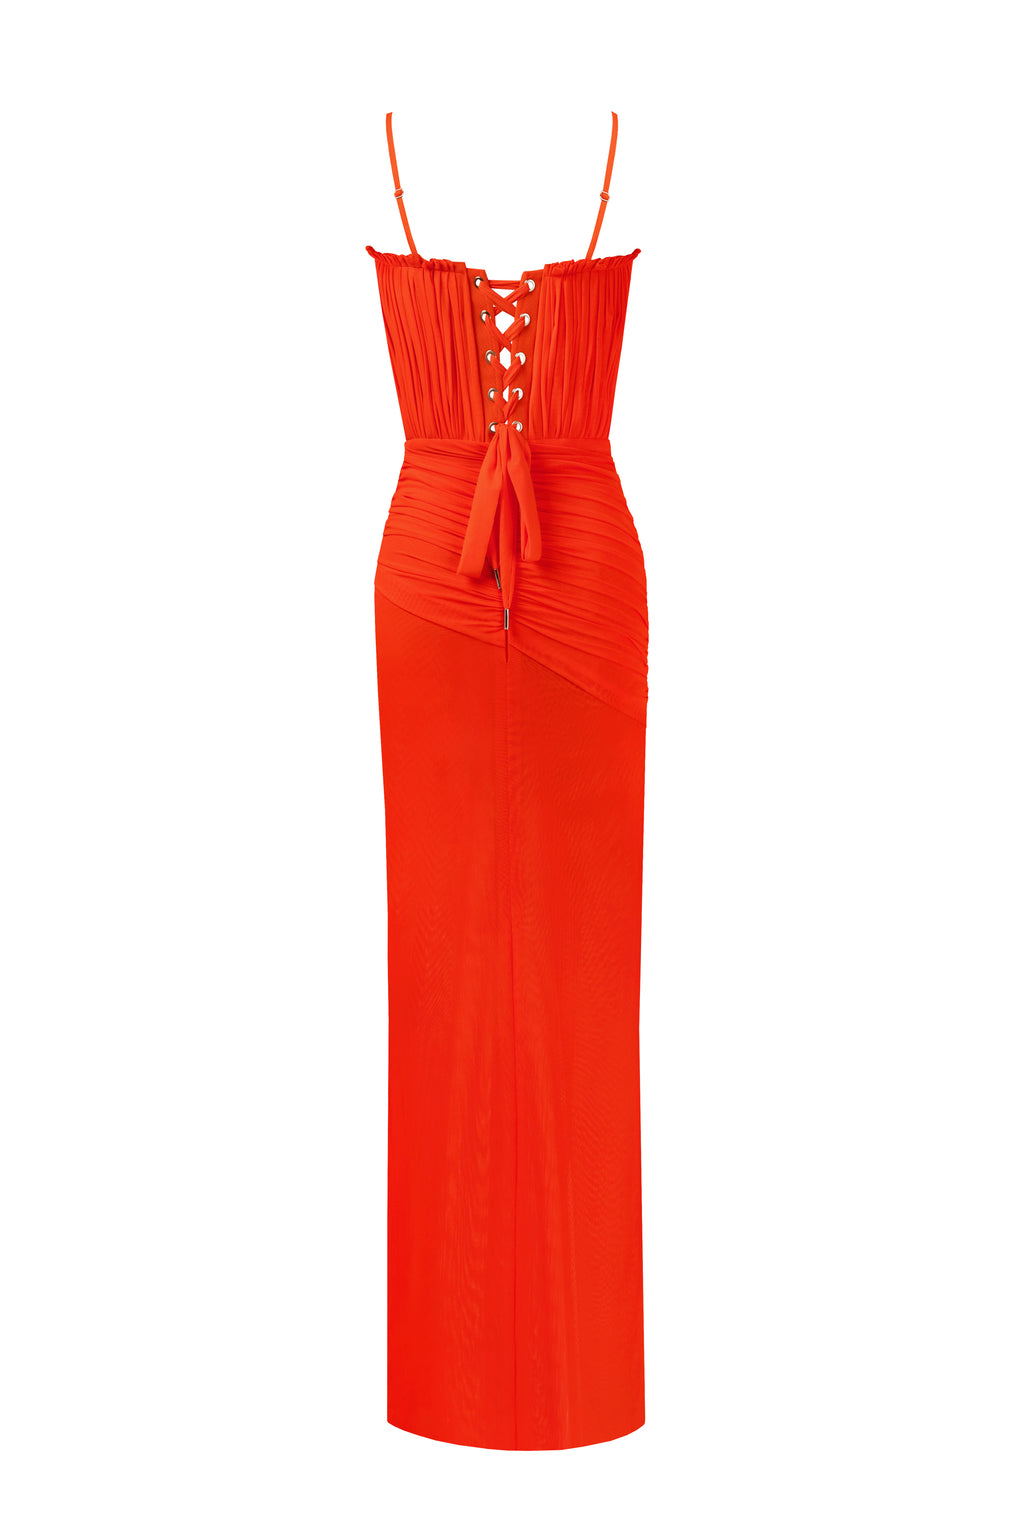 Flamboyant coral bustier maxi dress Milla Dresses - USA, Worldwide delivery